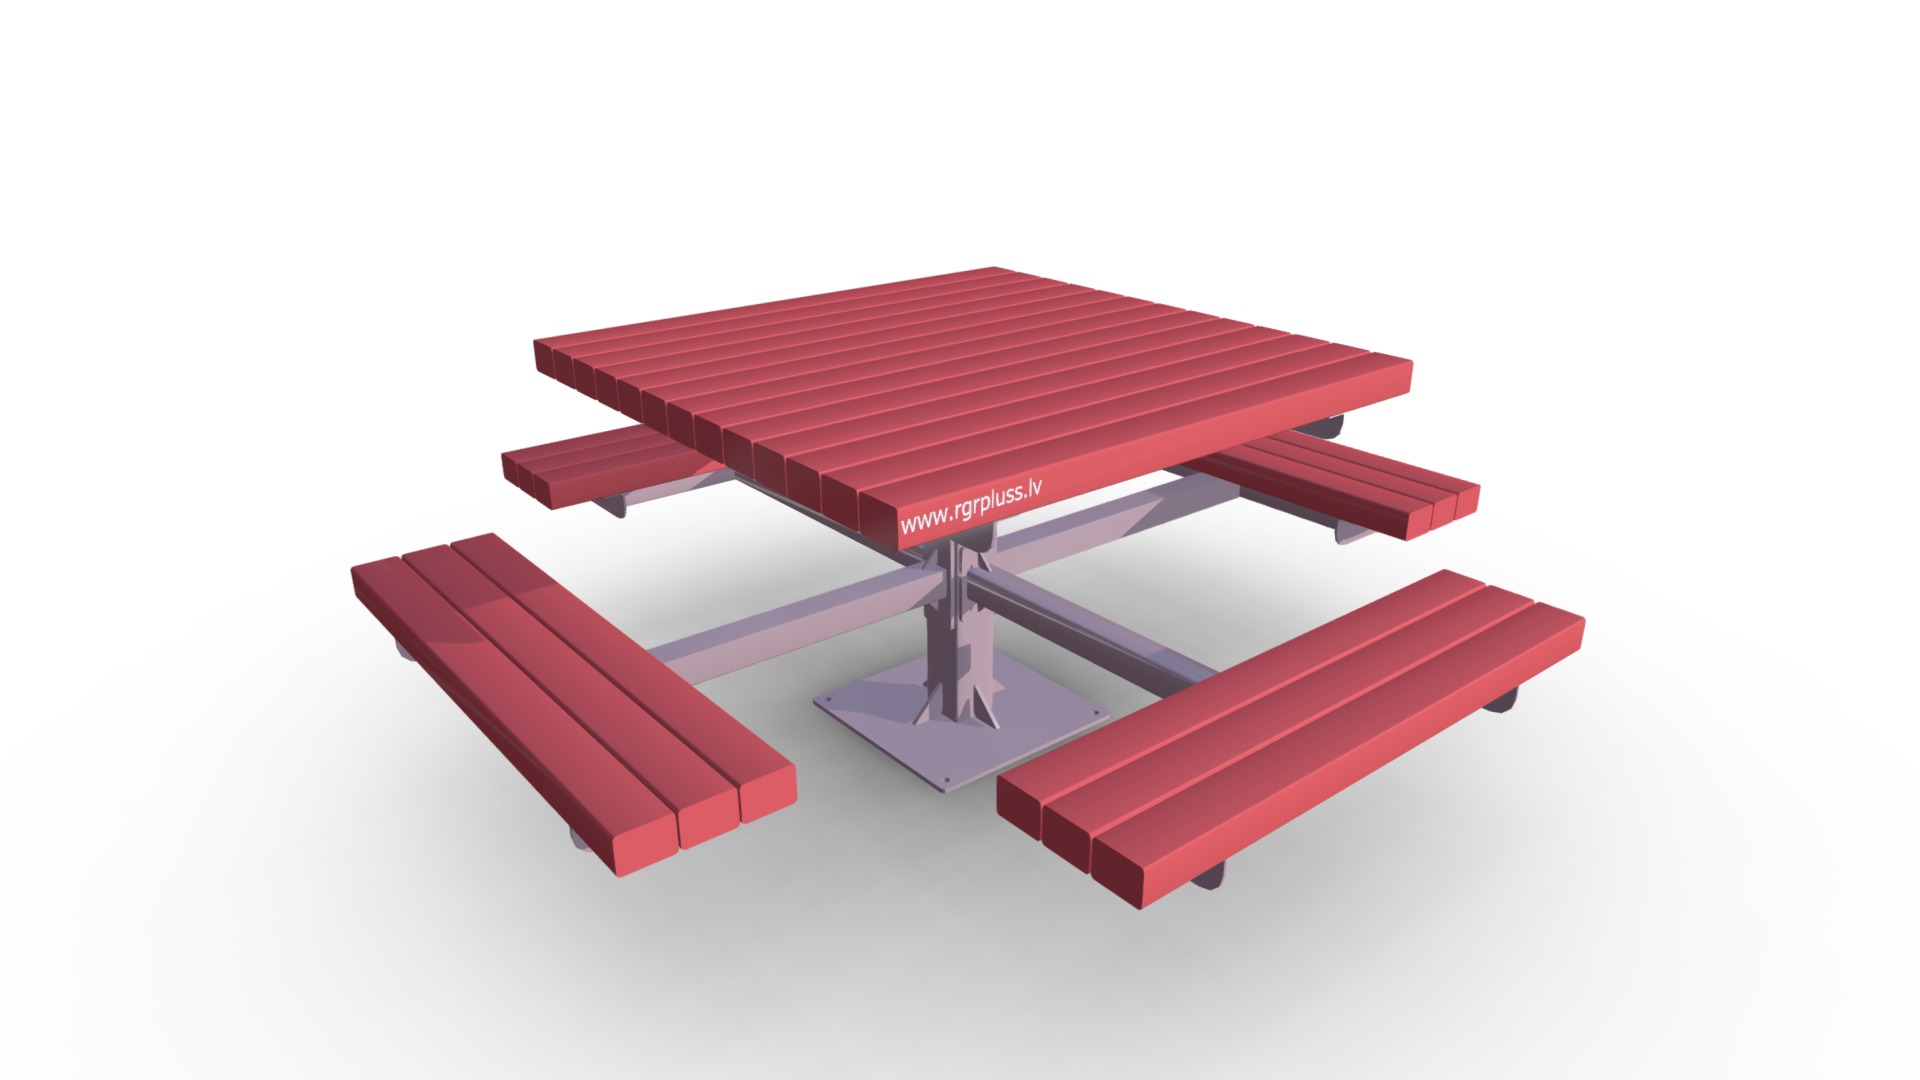 3D model GK-01 - This is a 3D model of the GK-01. The 3D model is about a red and black table.